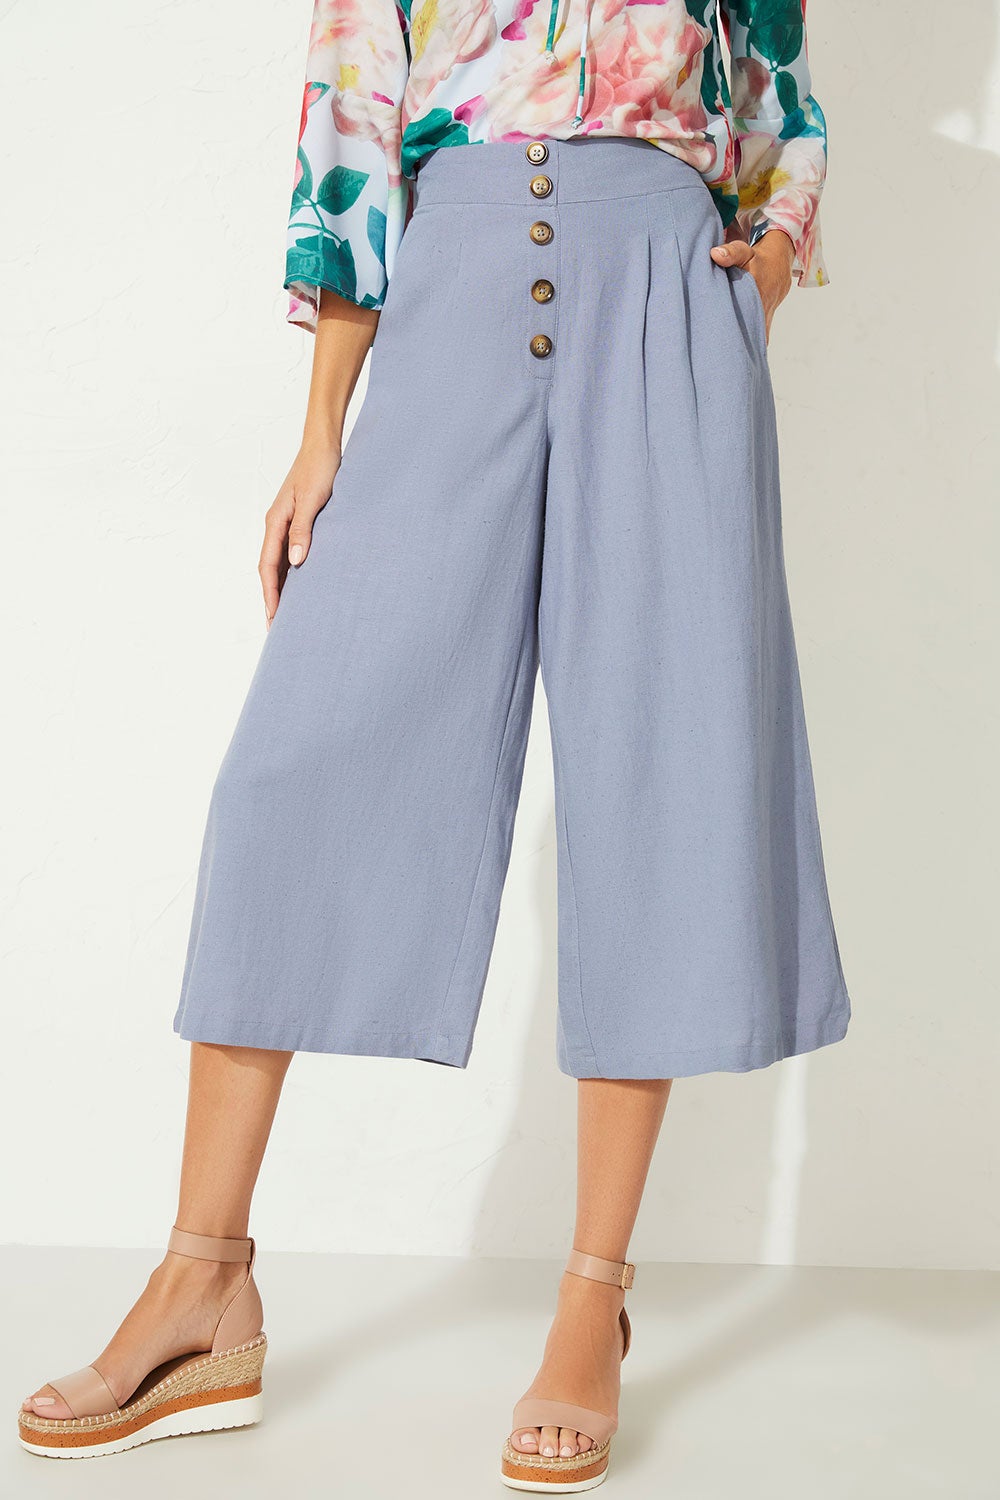 Anthropologie Wide Leg Denim Culottes Cropped Pants Pilcro Chambray Size 26  NEW | eBay